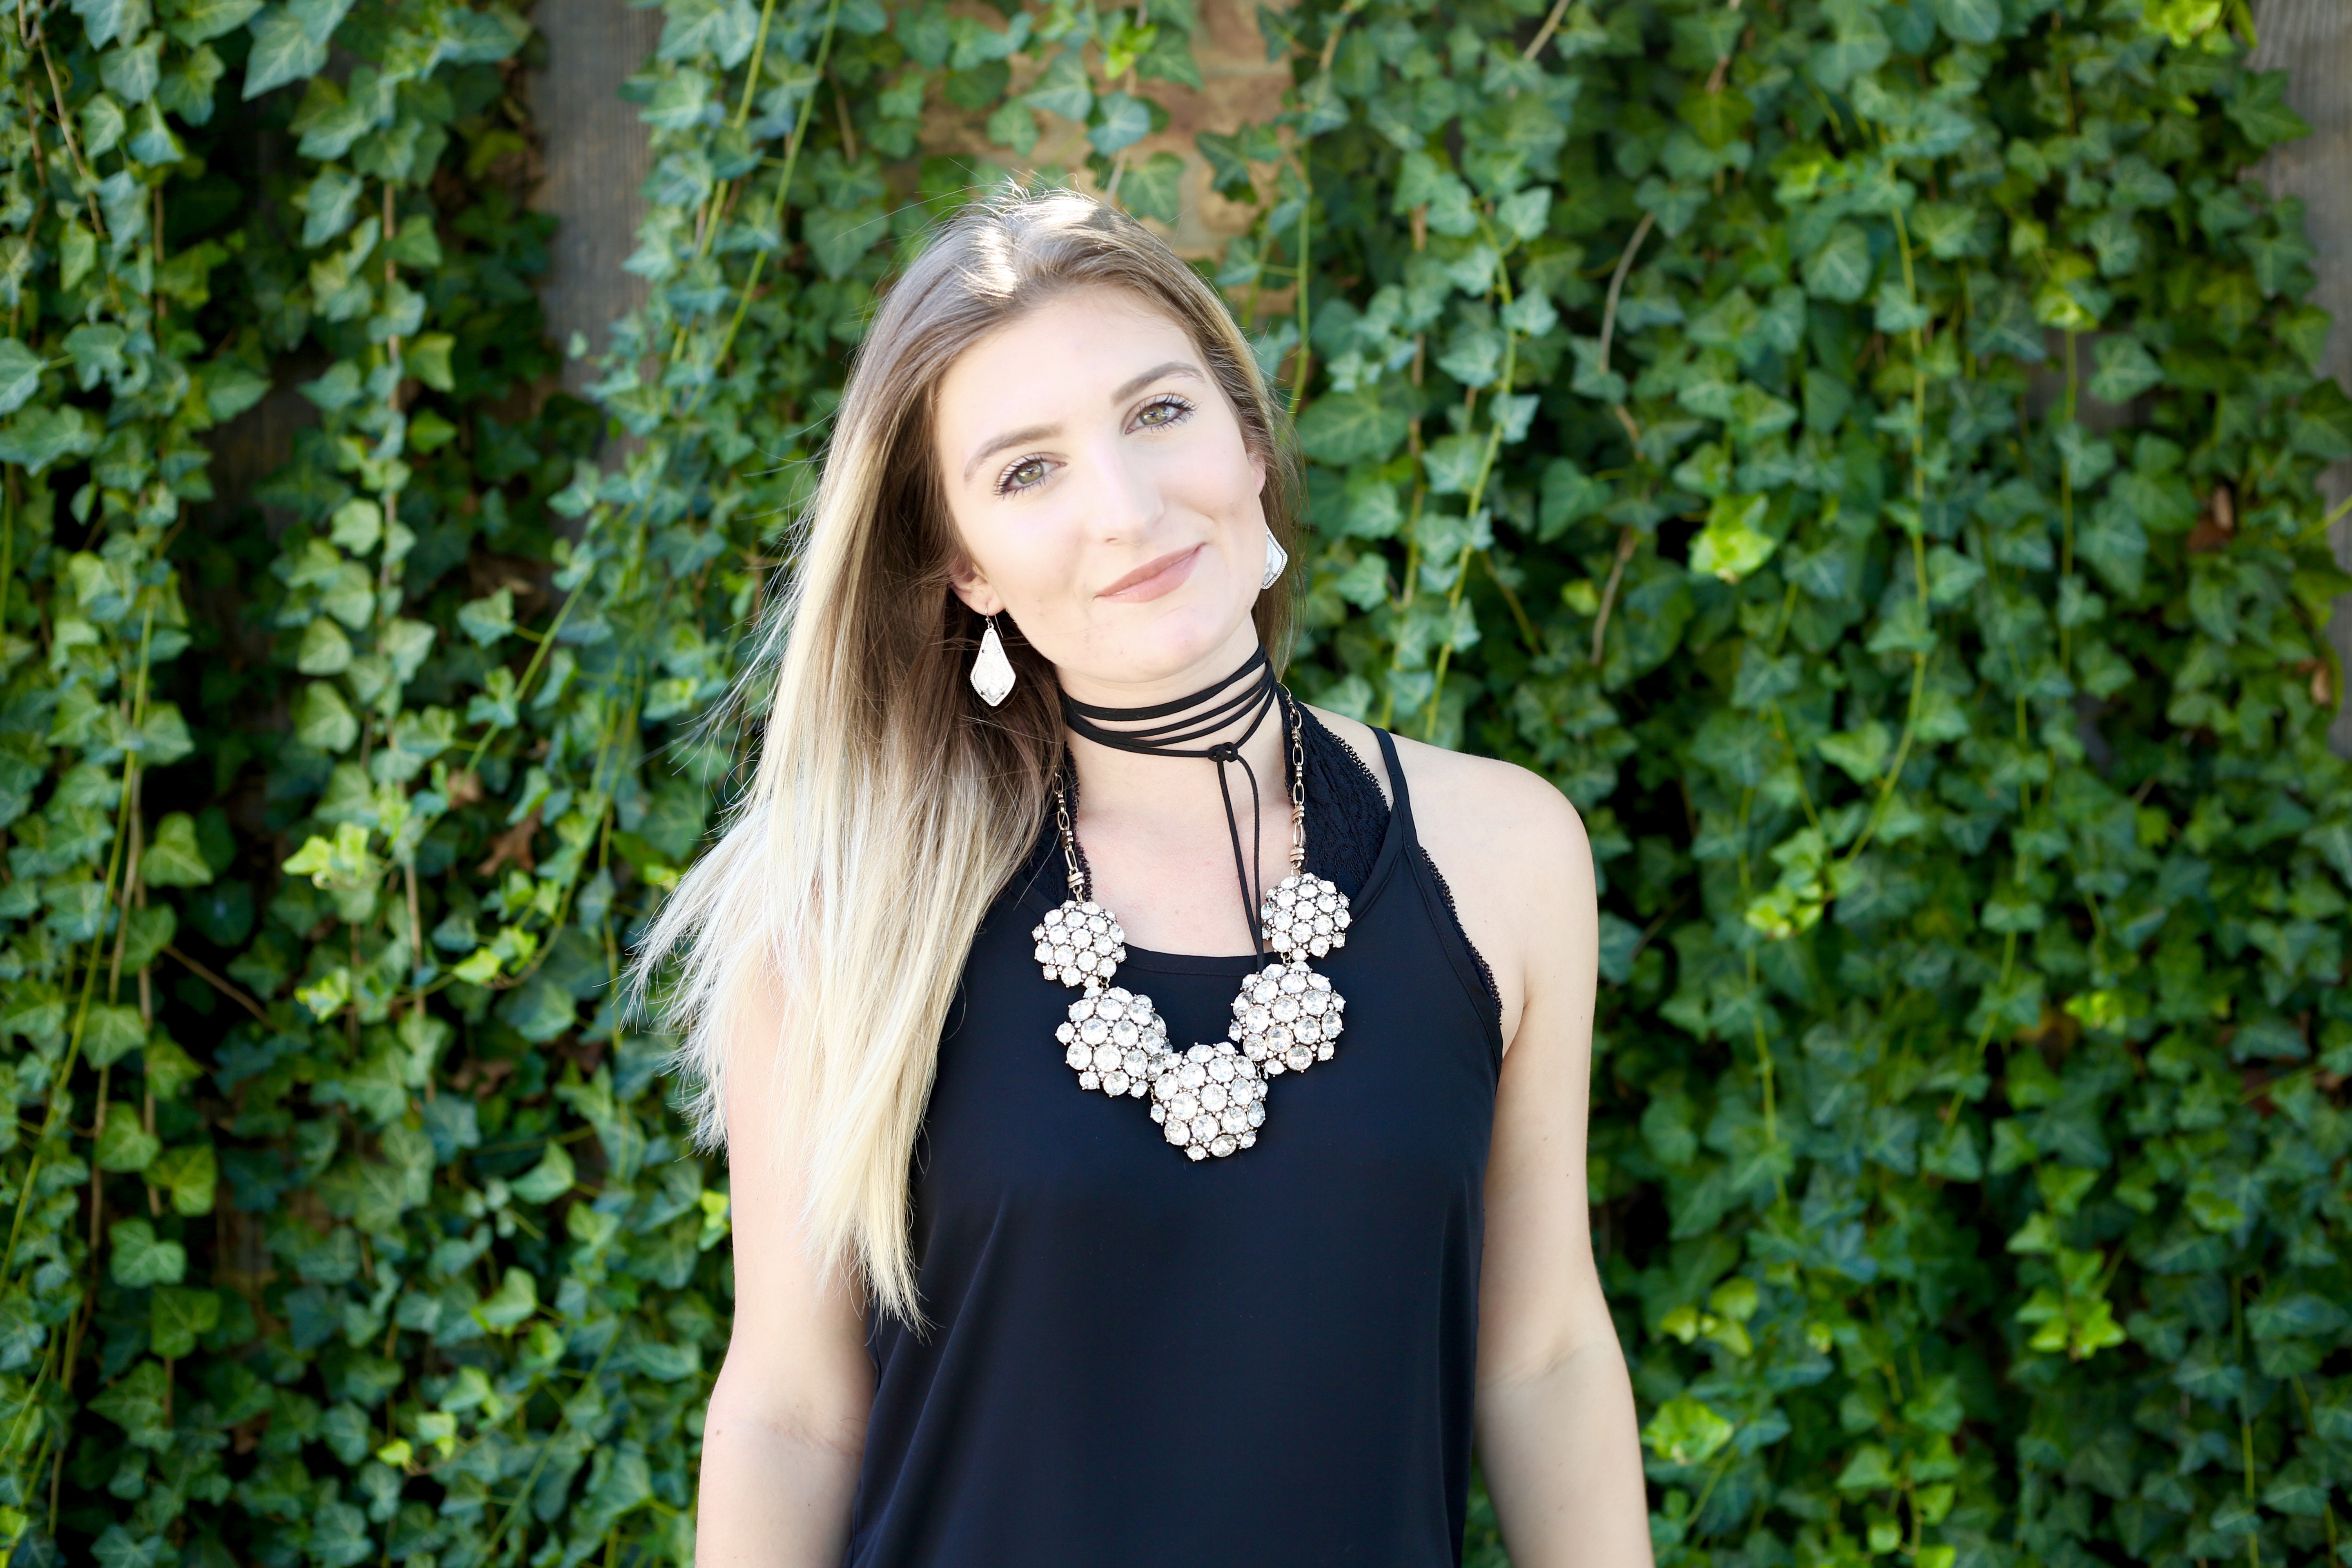 Pref Night - Sorority Recruitment look | AMS Blog - Preference Night dress by popular Texas fashion blogger and student Audrey Madison Stowe